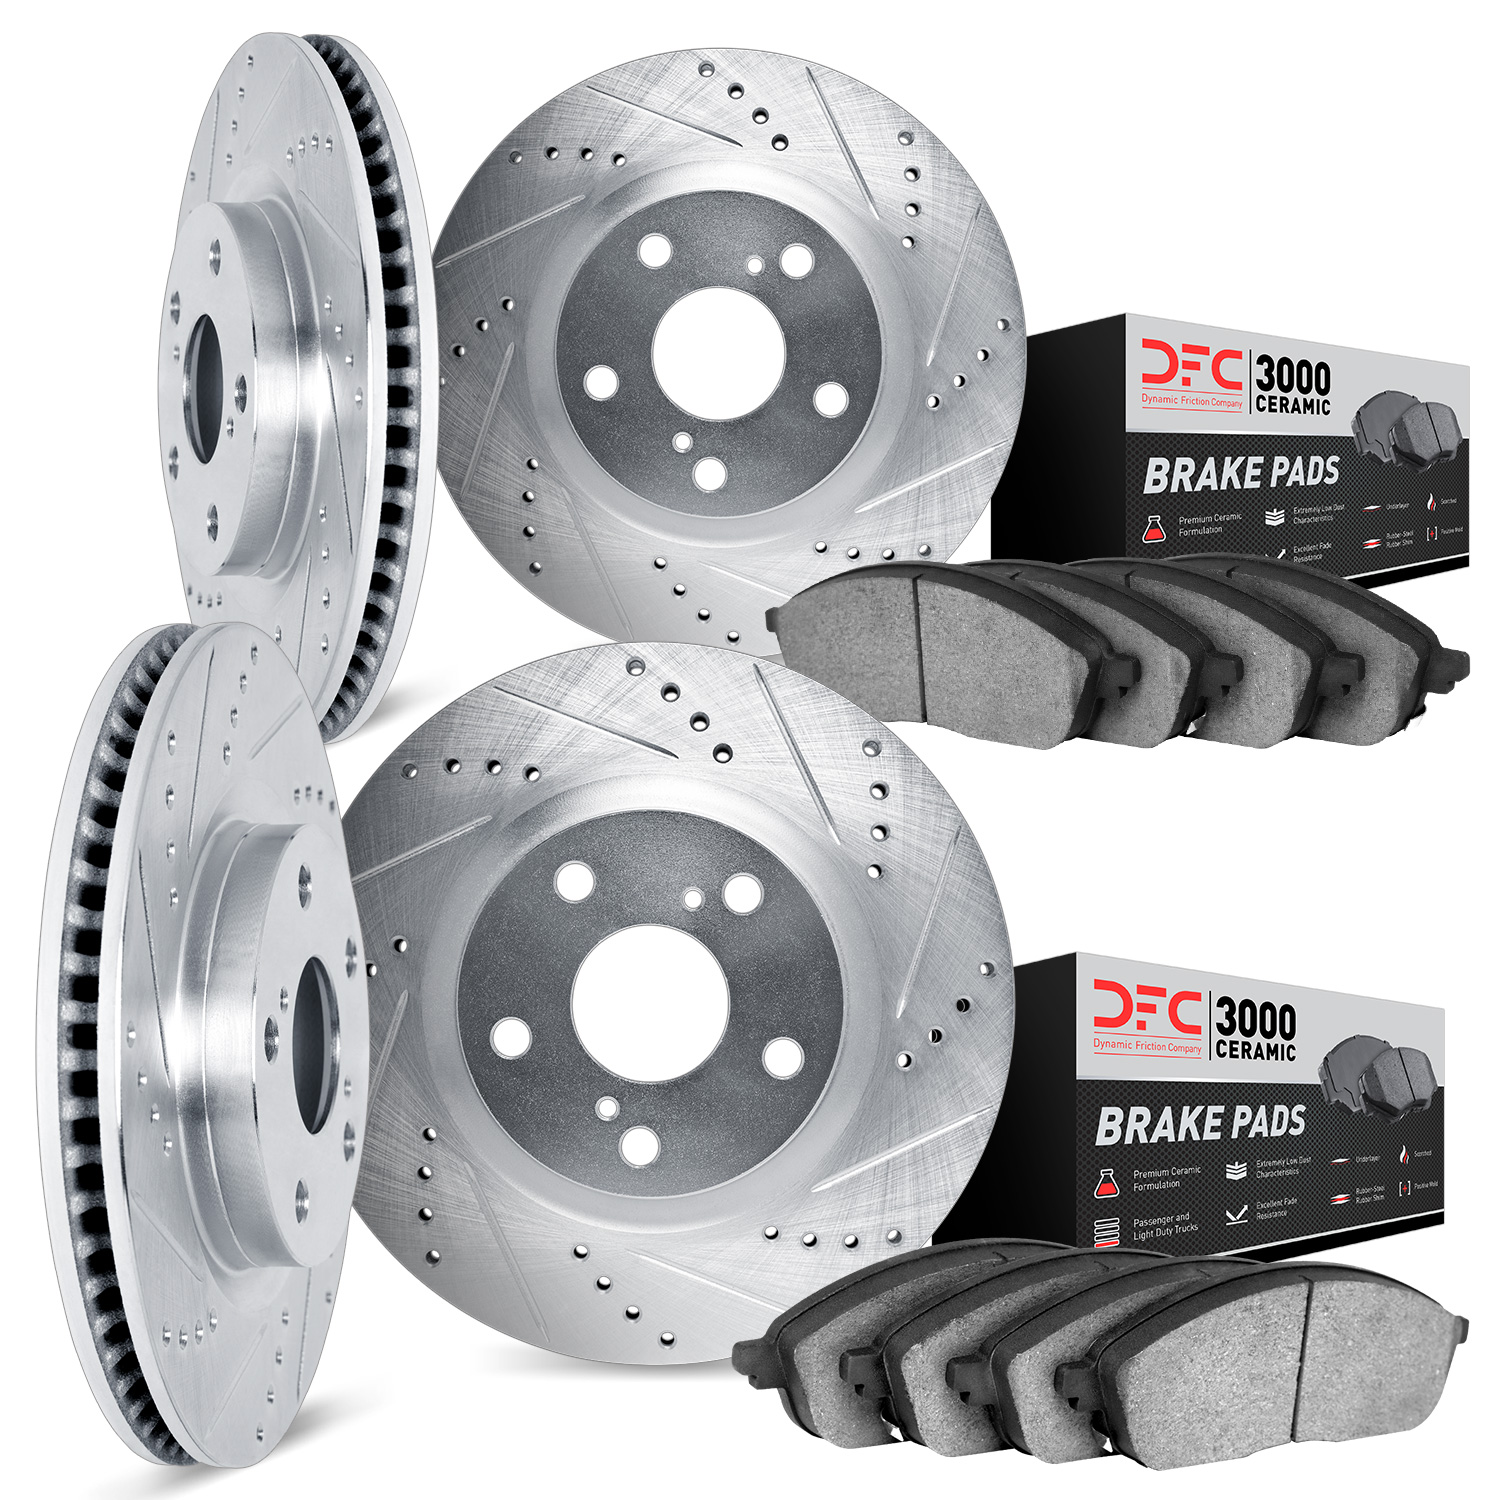 7304-31070 Drilled/Slotted Brake Rotor with 3000-Series Ceramic Brake Pads Kit [Silver], 2007-2019 BMW, Position: Front and Rear